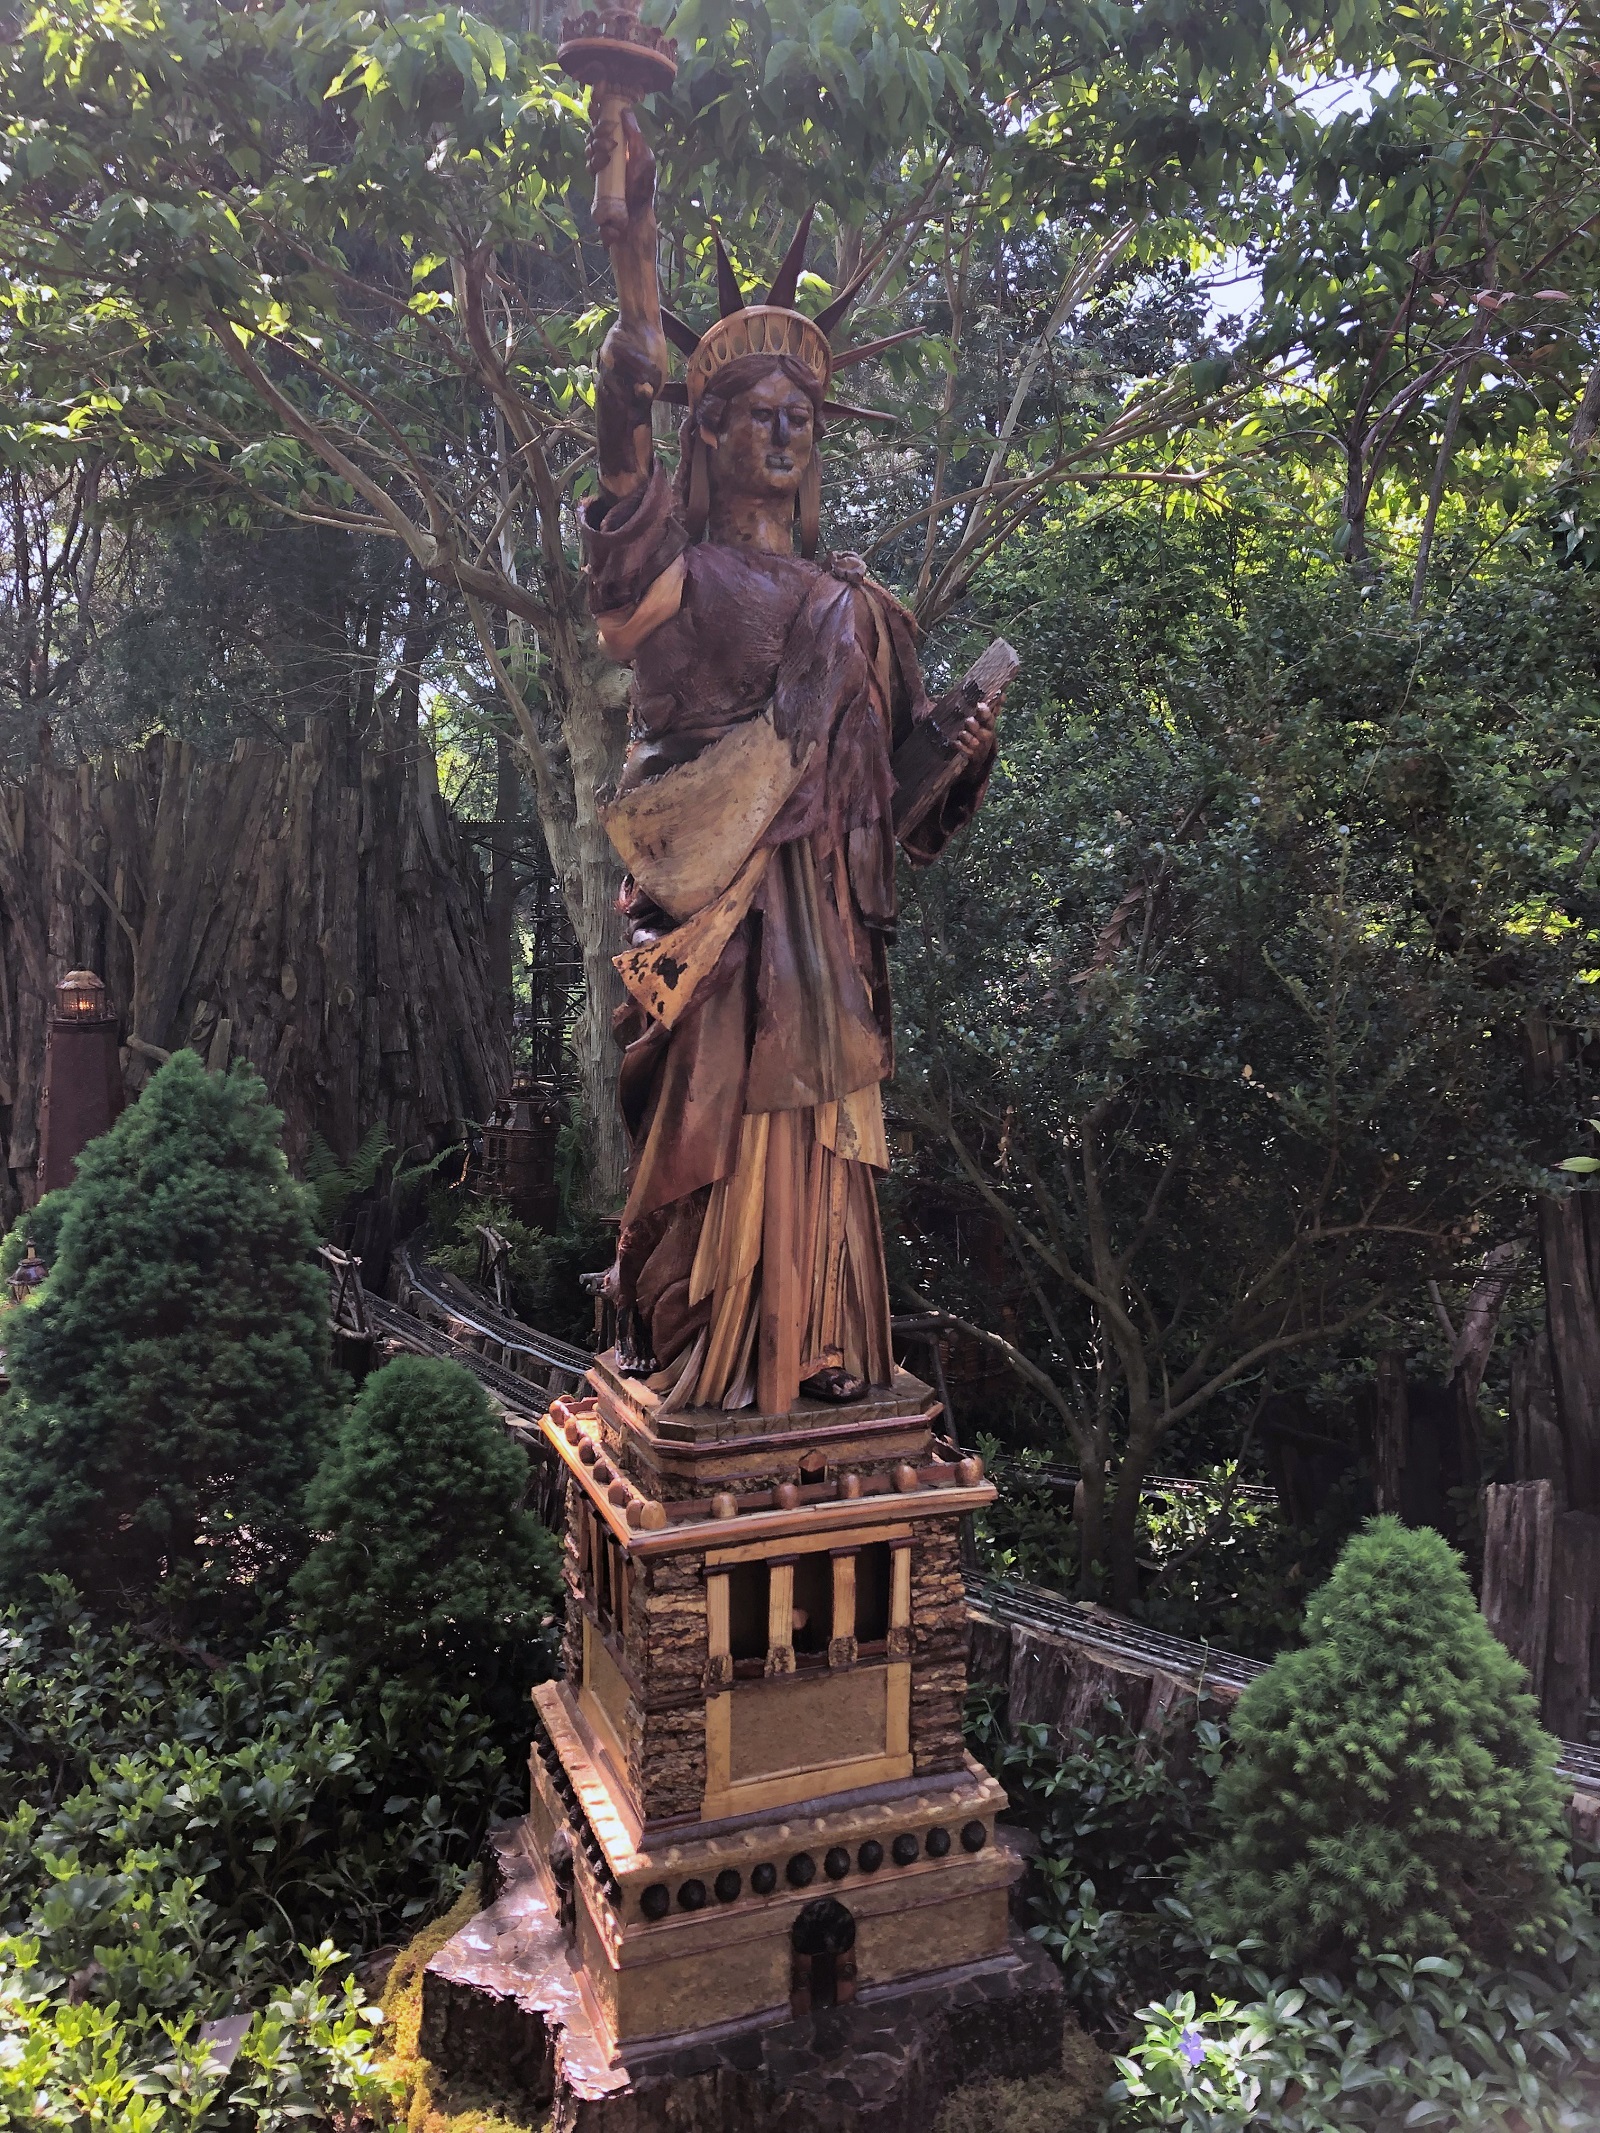 Statue of Liberty made with natural materials surrounded by shrubs